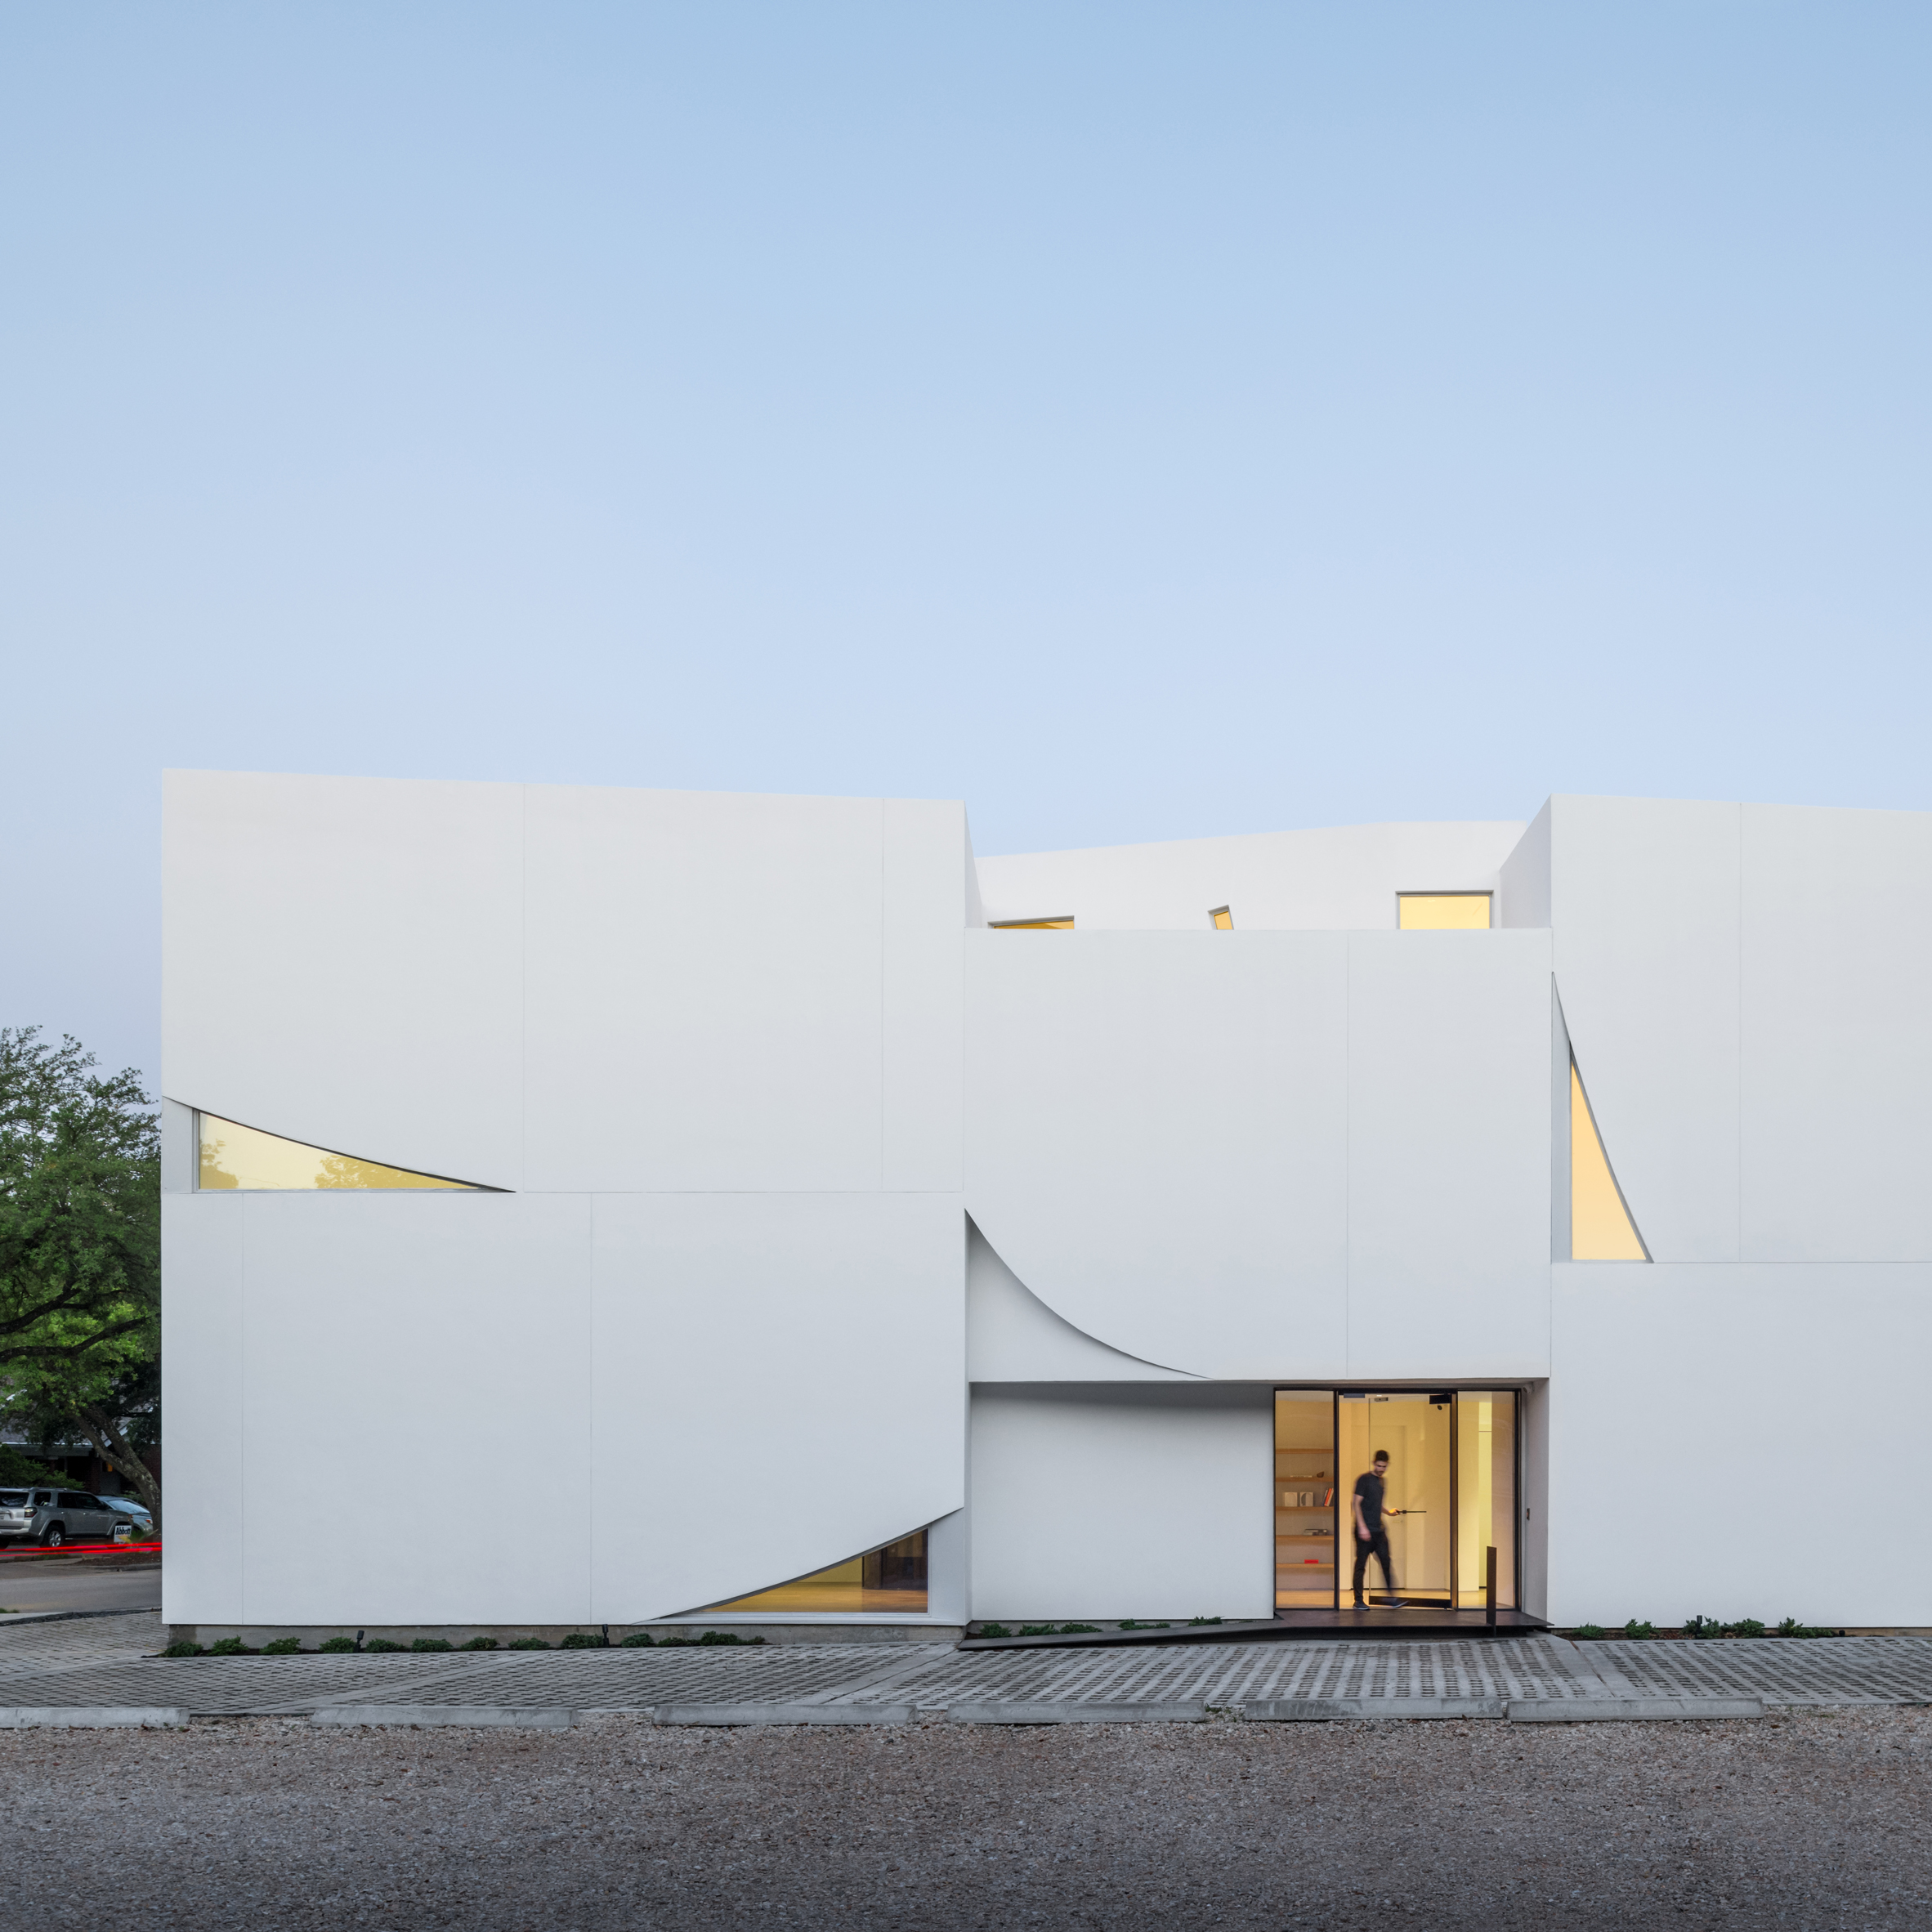 Transart Foundation for Art and Anthropology by Shaum/Shieh, Dezeen's top museums and galleries